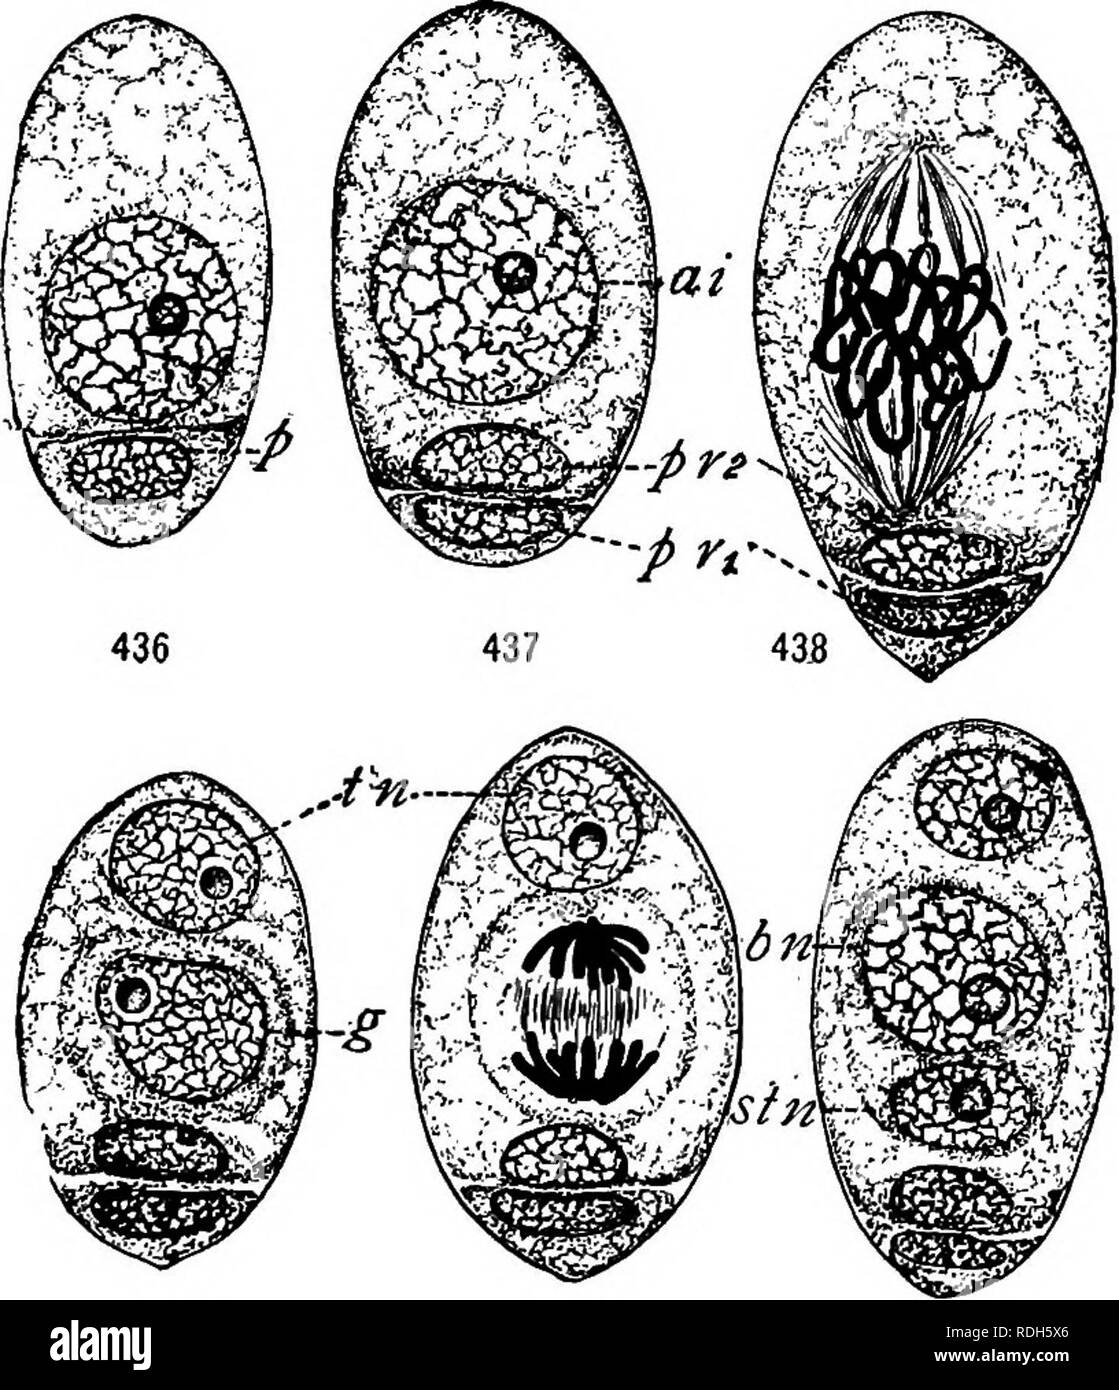 . Morphology of gymnosperms. Gymnosperms; Plant morphology. 39° MORPHOLOGY OF GYMNOSPERMS After reaching the deep pollen chamber, the exine of the spore is sloughed off and the intine with its contents is completely freed. The two prothallial cells soon disappear, and the nucleus of the body cell divides to form two equal male nuclei. The tube nucleus moves around the cavity of the grain and comes to rest against the wall, and soon after the pollen tube is put out from this point of contact. 439 440 44.1&quot; Figs. 436-441.—Ephedra irifurea: germination of the microspore; ^, first prothal- li Stock Photo